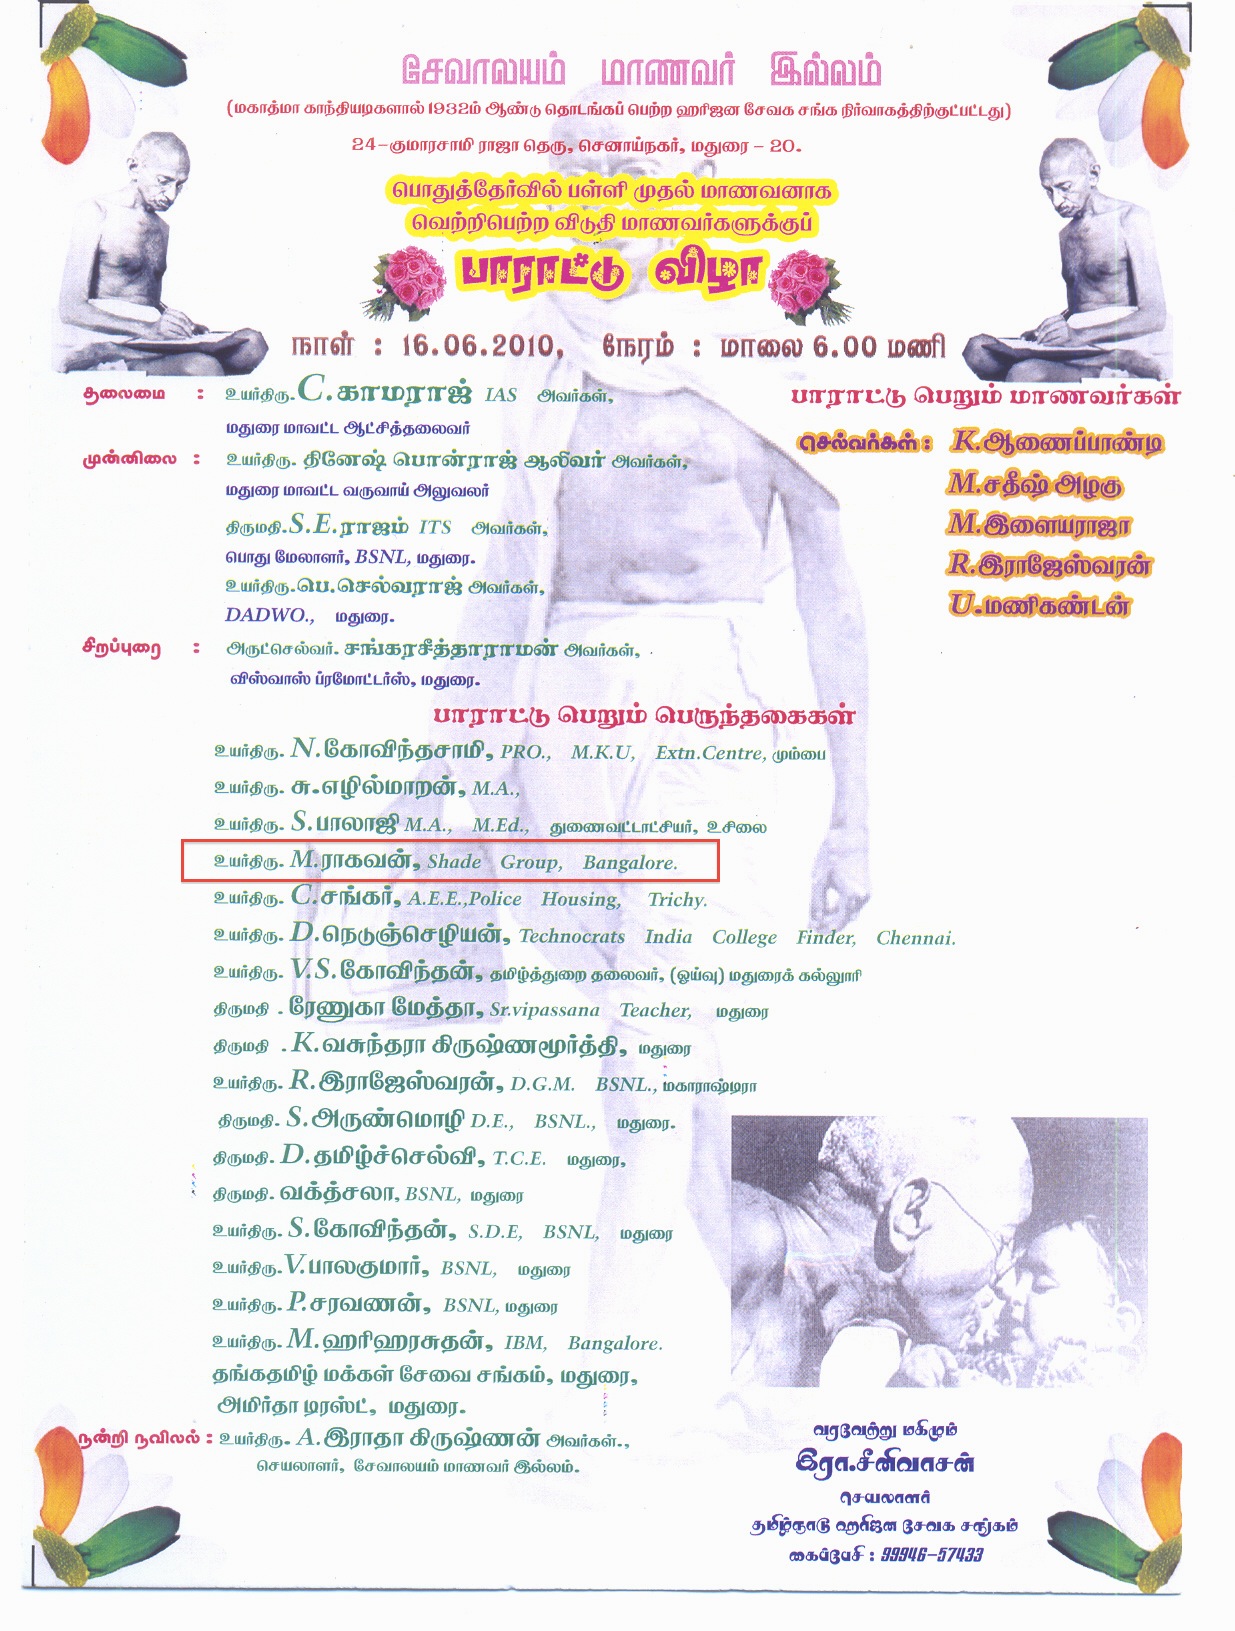 The Invitation from Sevalayam for the event on 16Jun2010